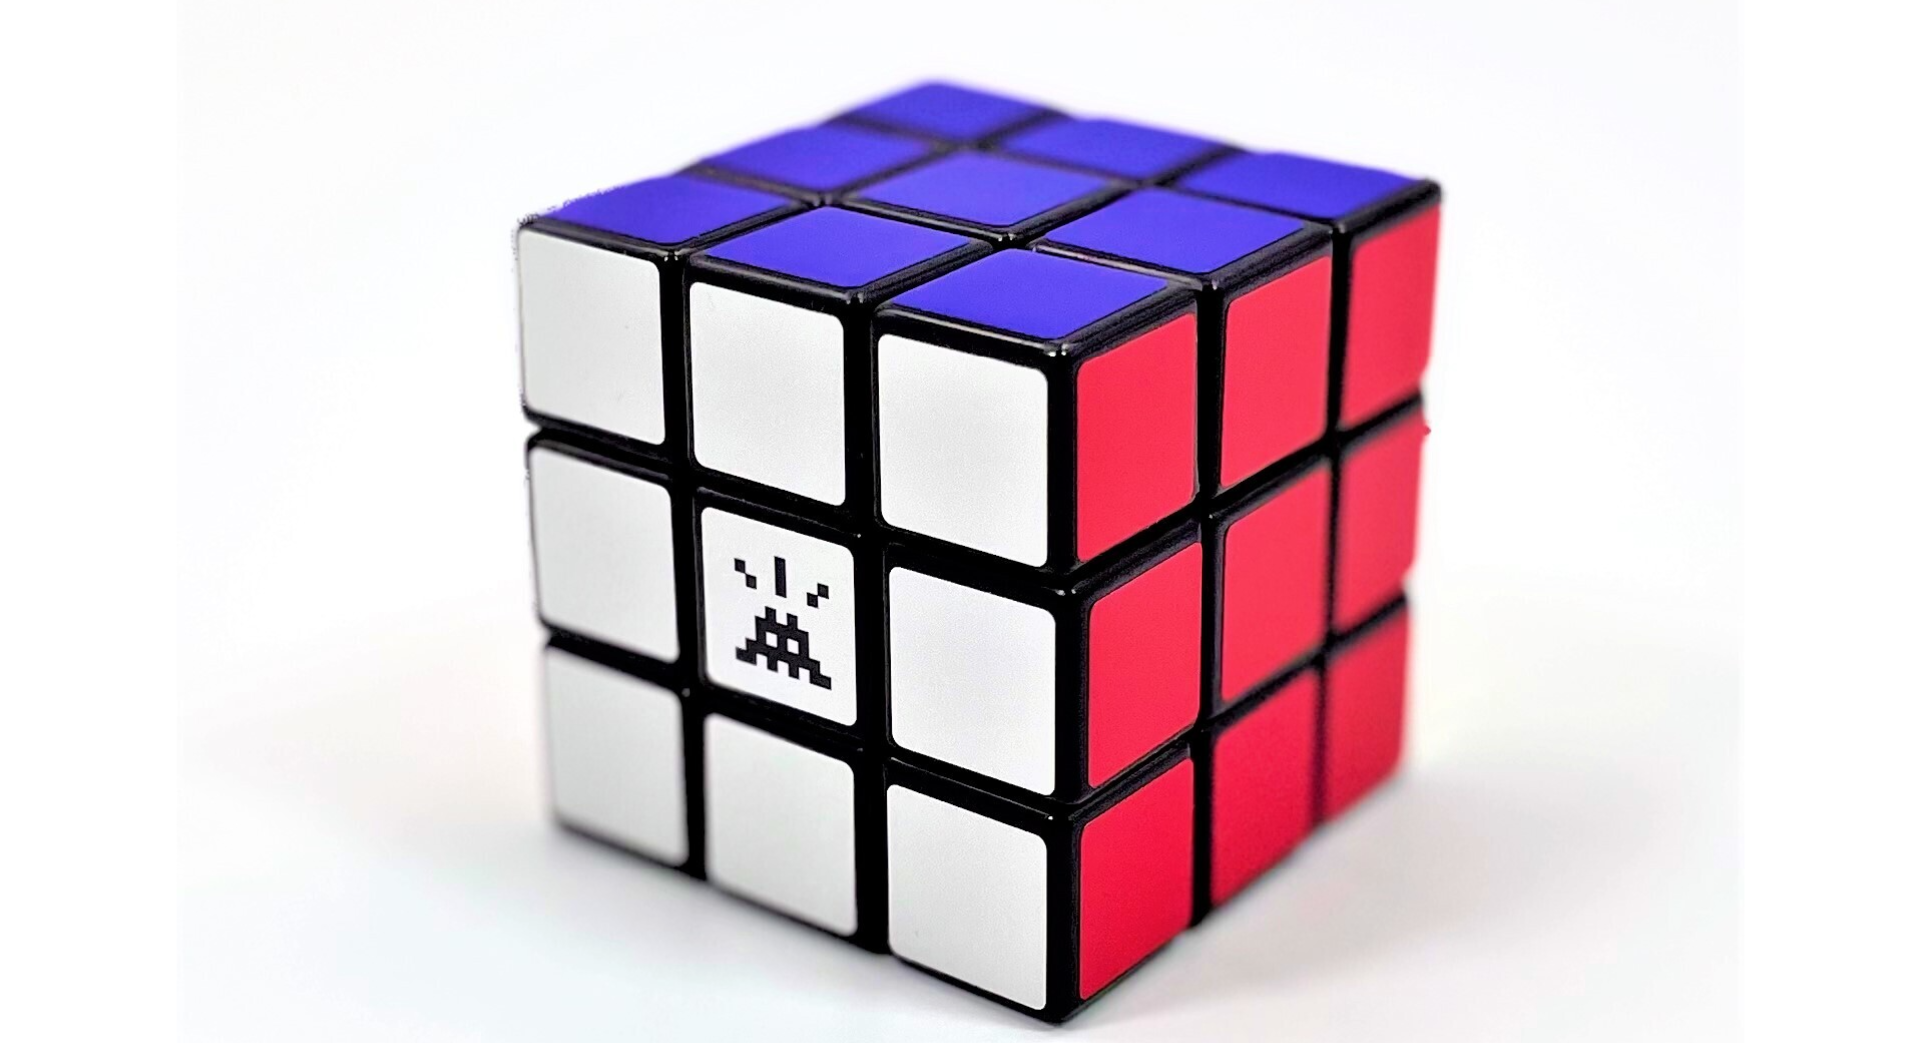 Invader Limited Edition Rubik's Cube, 2022